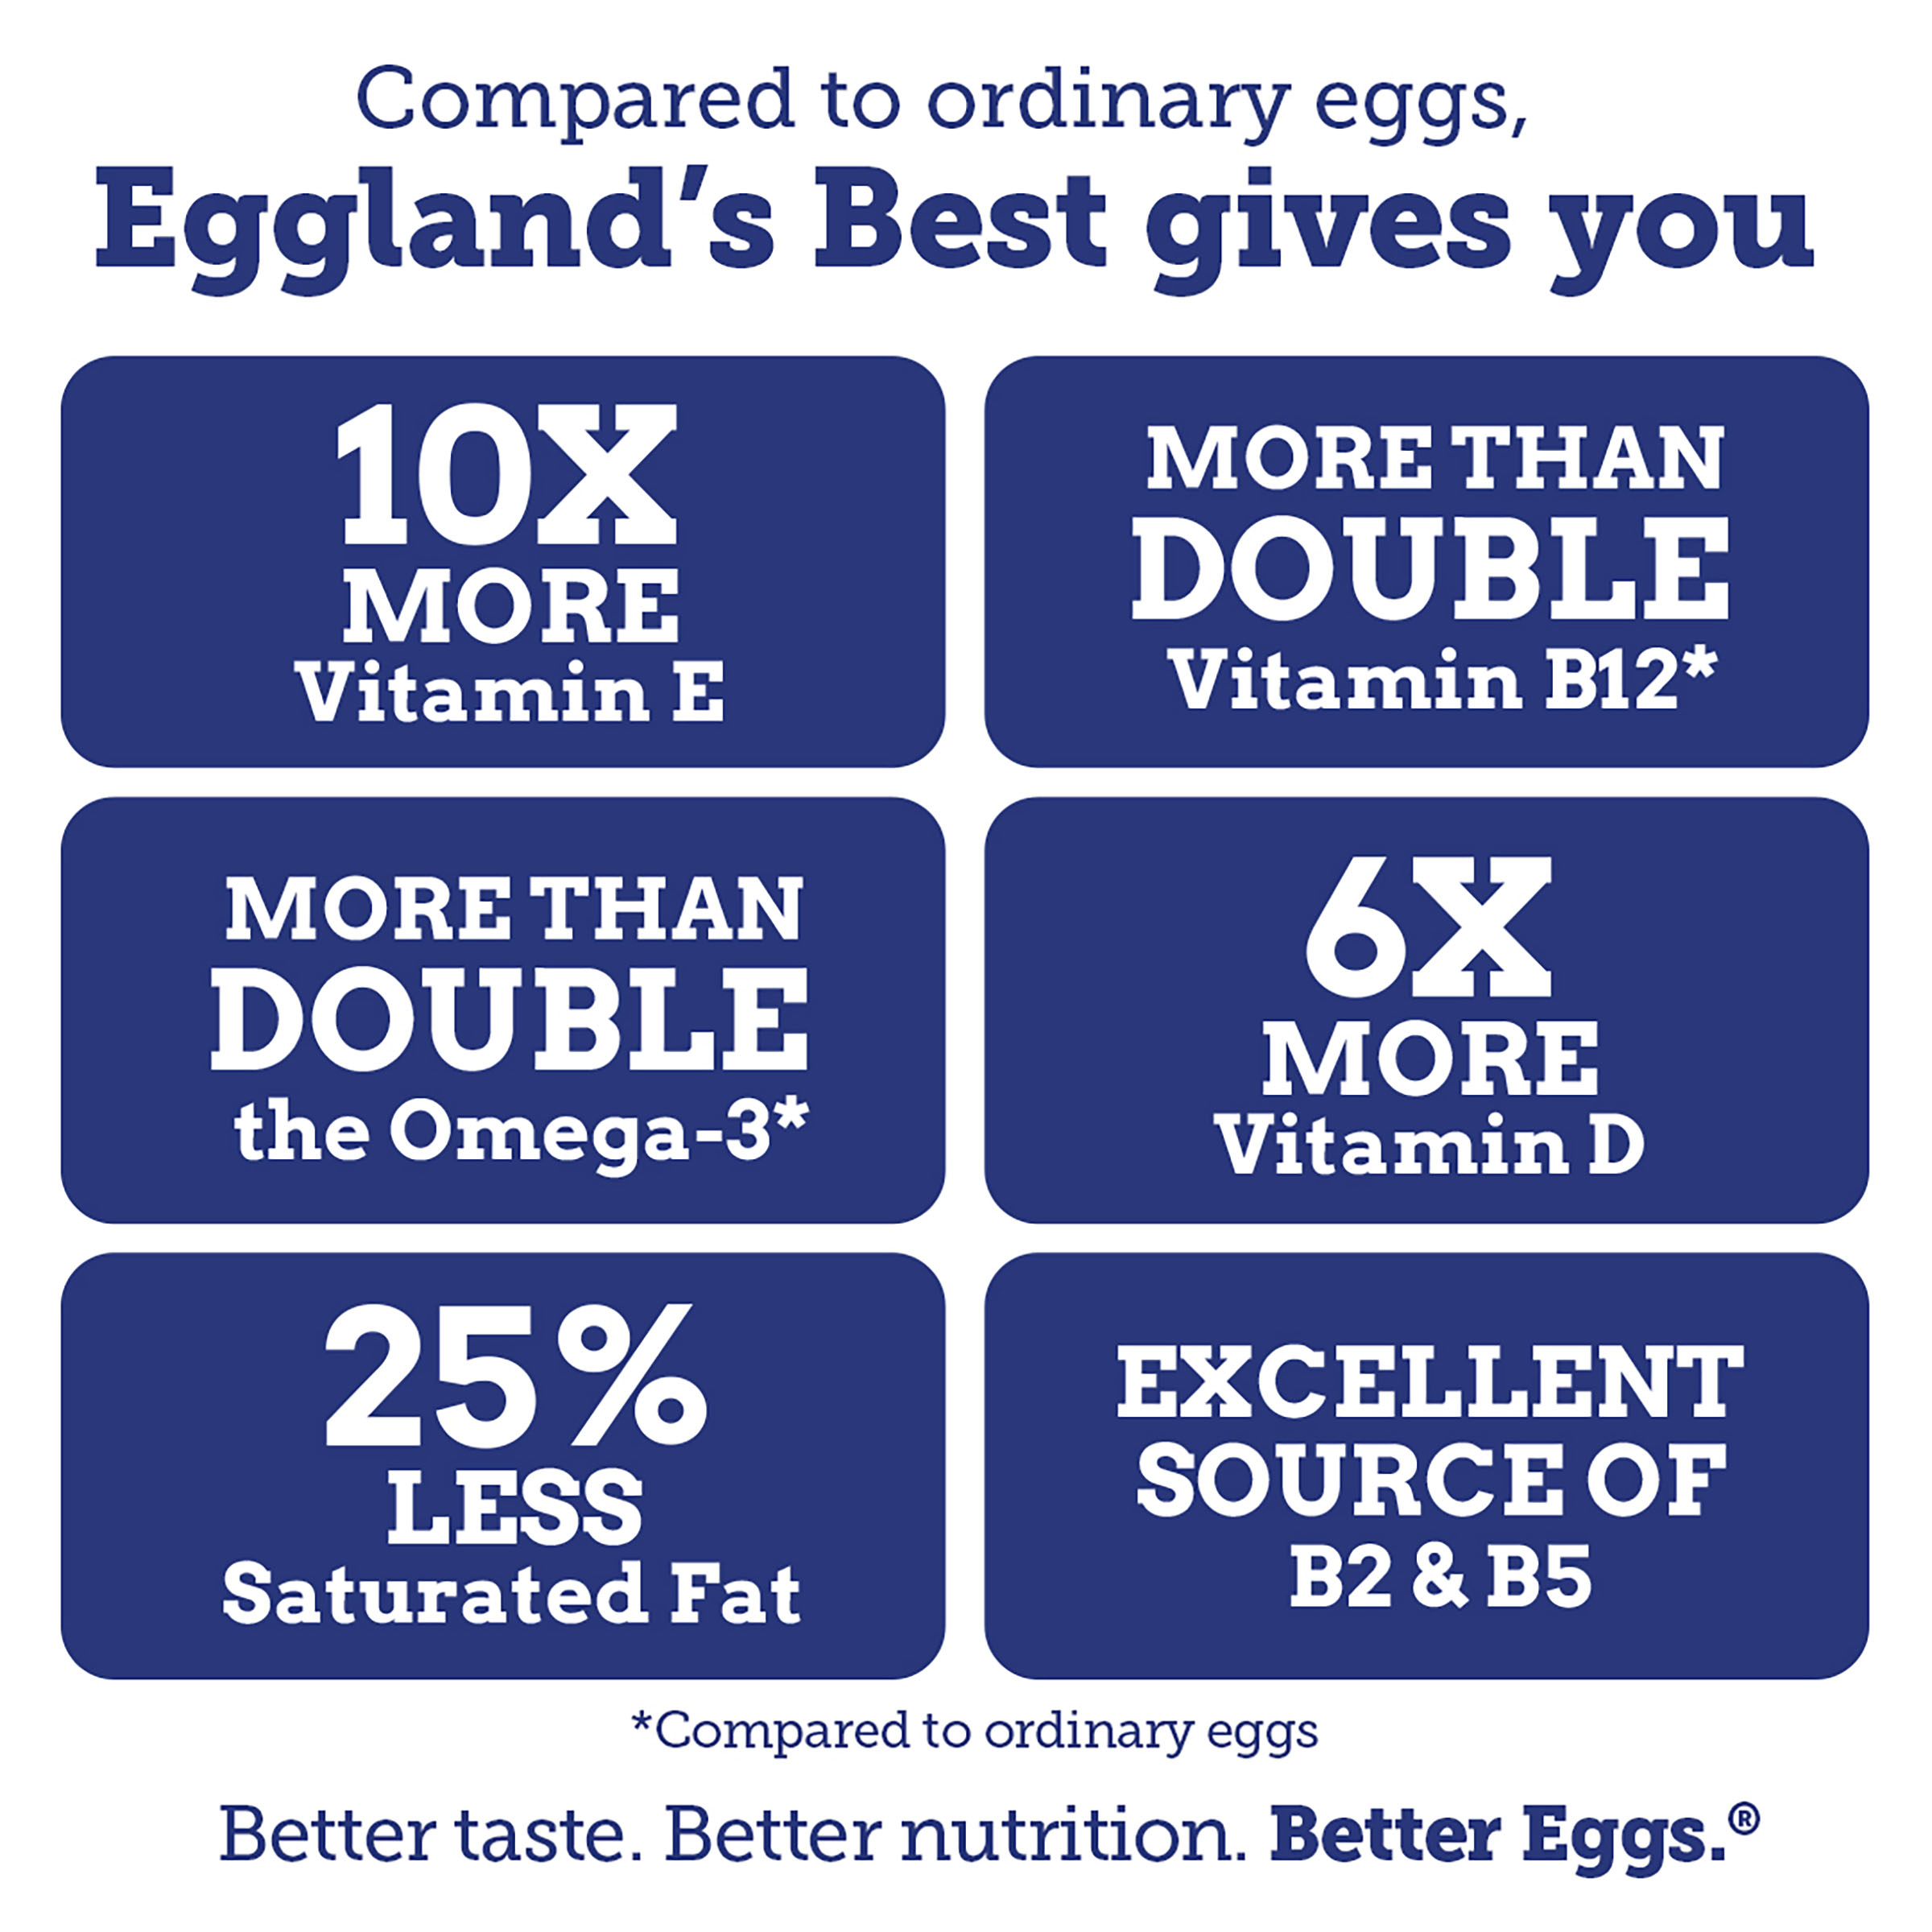 Eggland's Best 100% USDA Organic Certified Large Brown Eggs, 12 count - image 5 of 16